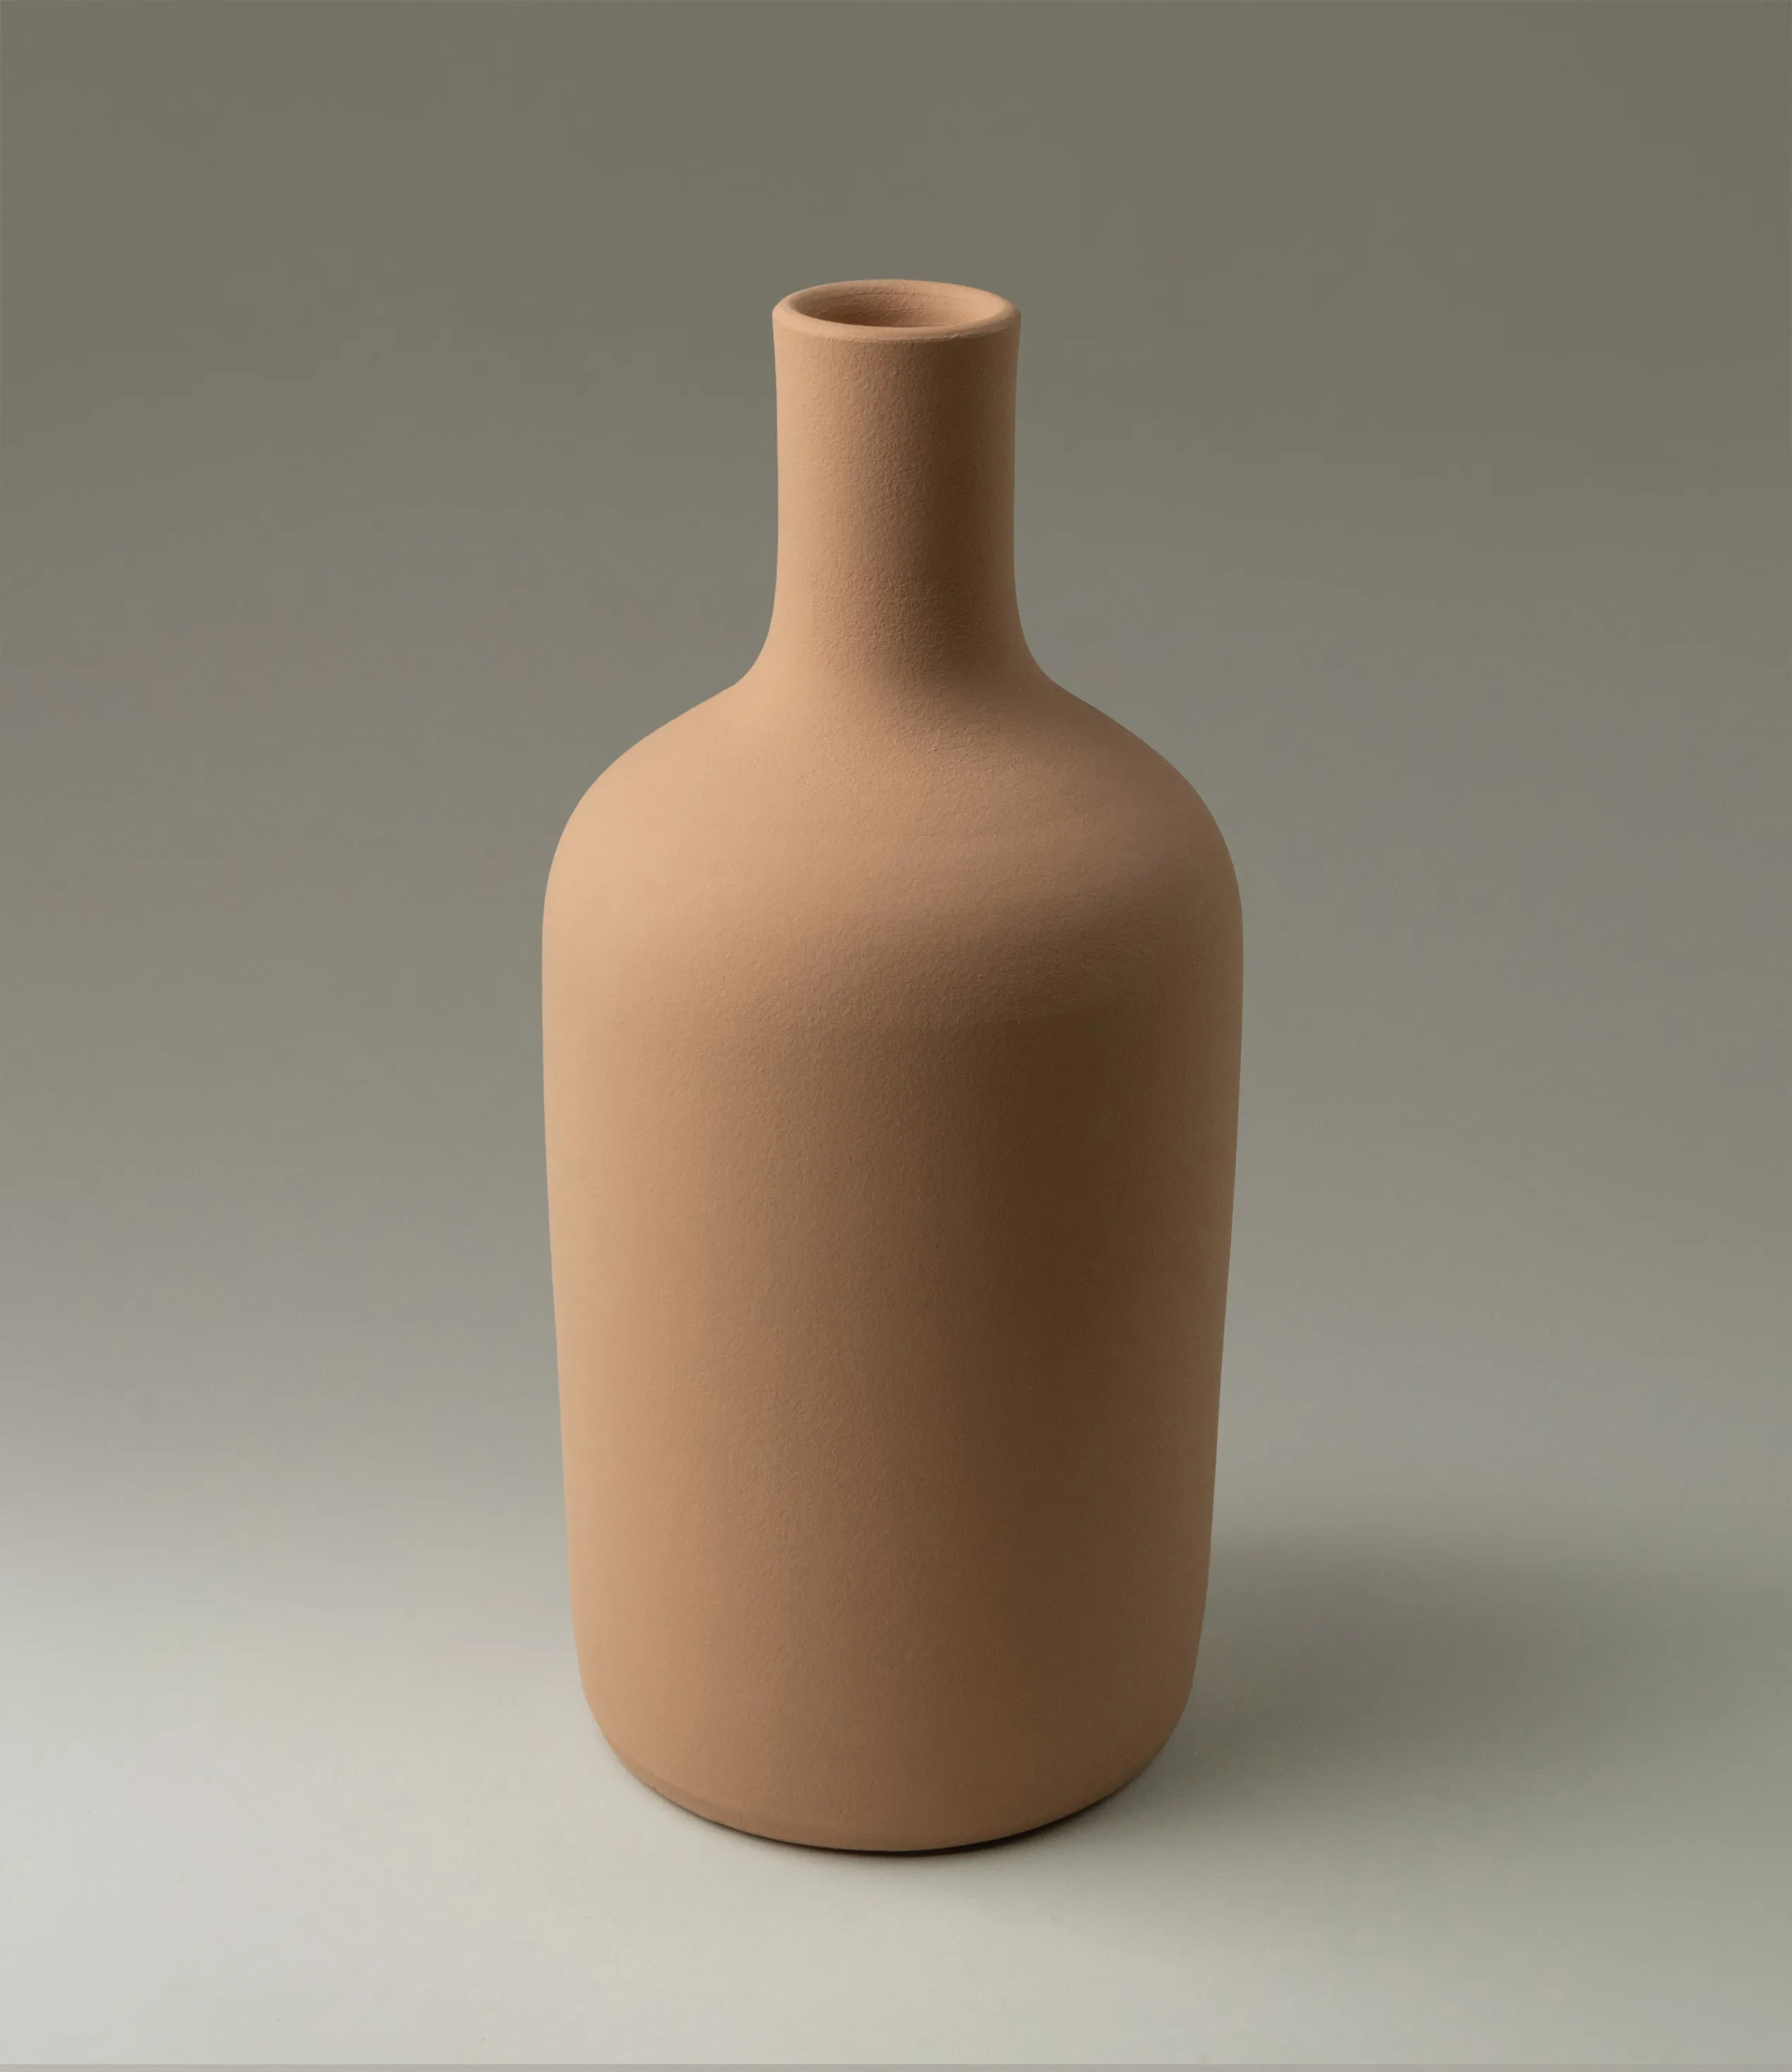 This Beige Vase from Ocactuu has a pure silhouette with a natural beige shade. It is a medium sized vase, perfect for your fresh flowers. The neck of the vase is rather tight thus you can use this piece with only a few branch as well. Perfect choice for a minimalist home, but can balance well other more playful items too.